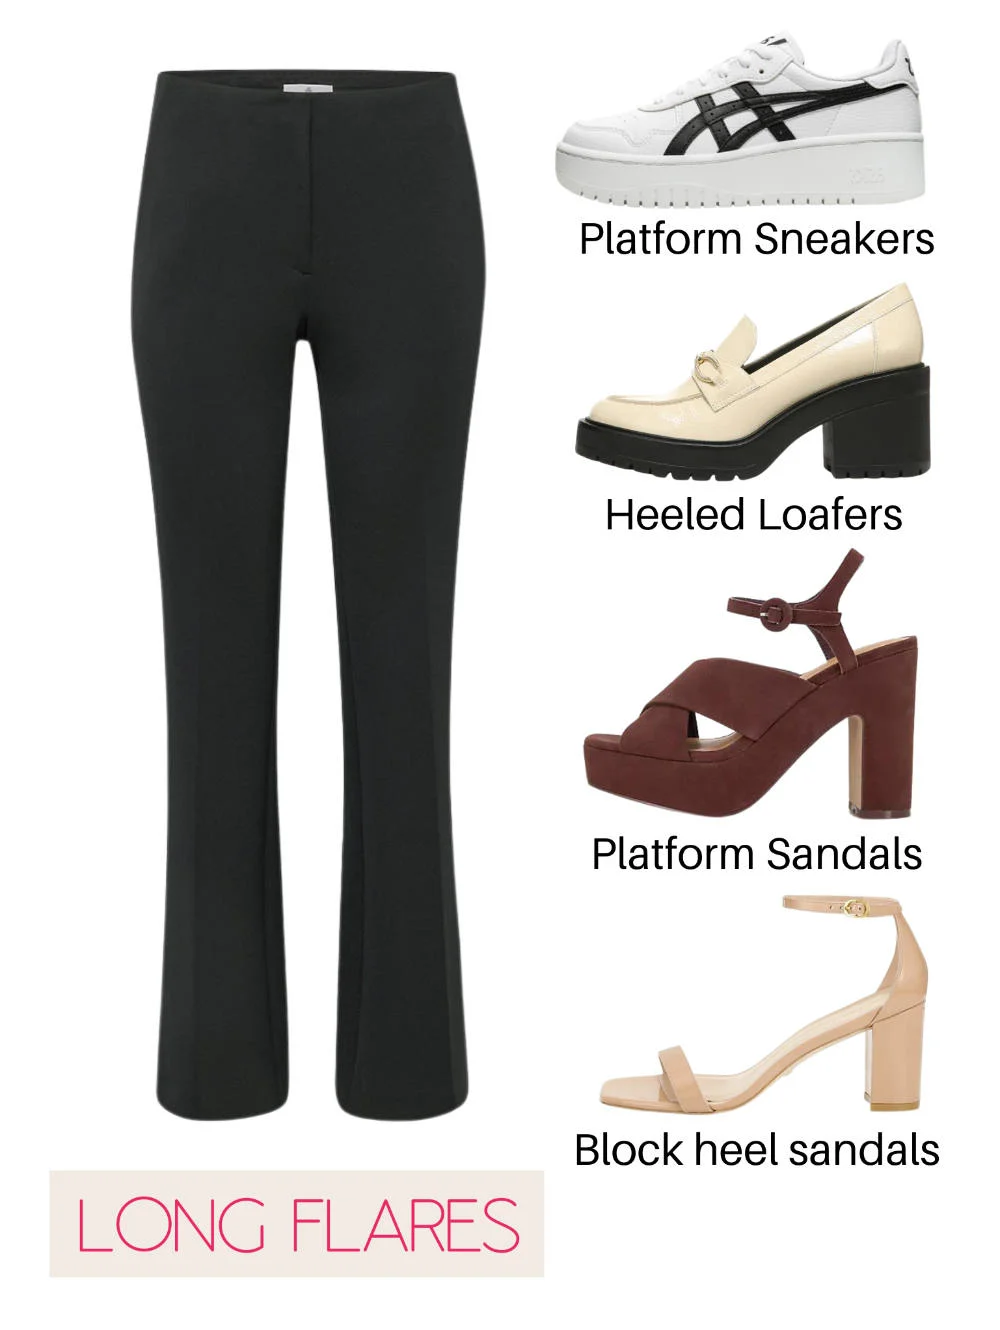 Collage of black long flare dress pants with 4 shoes to wear them with.